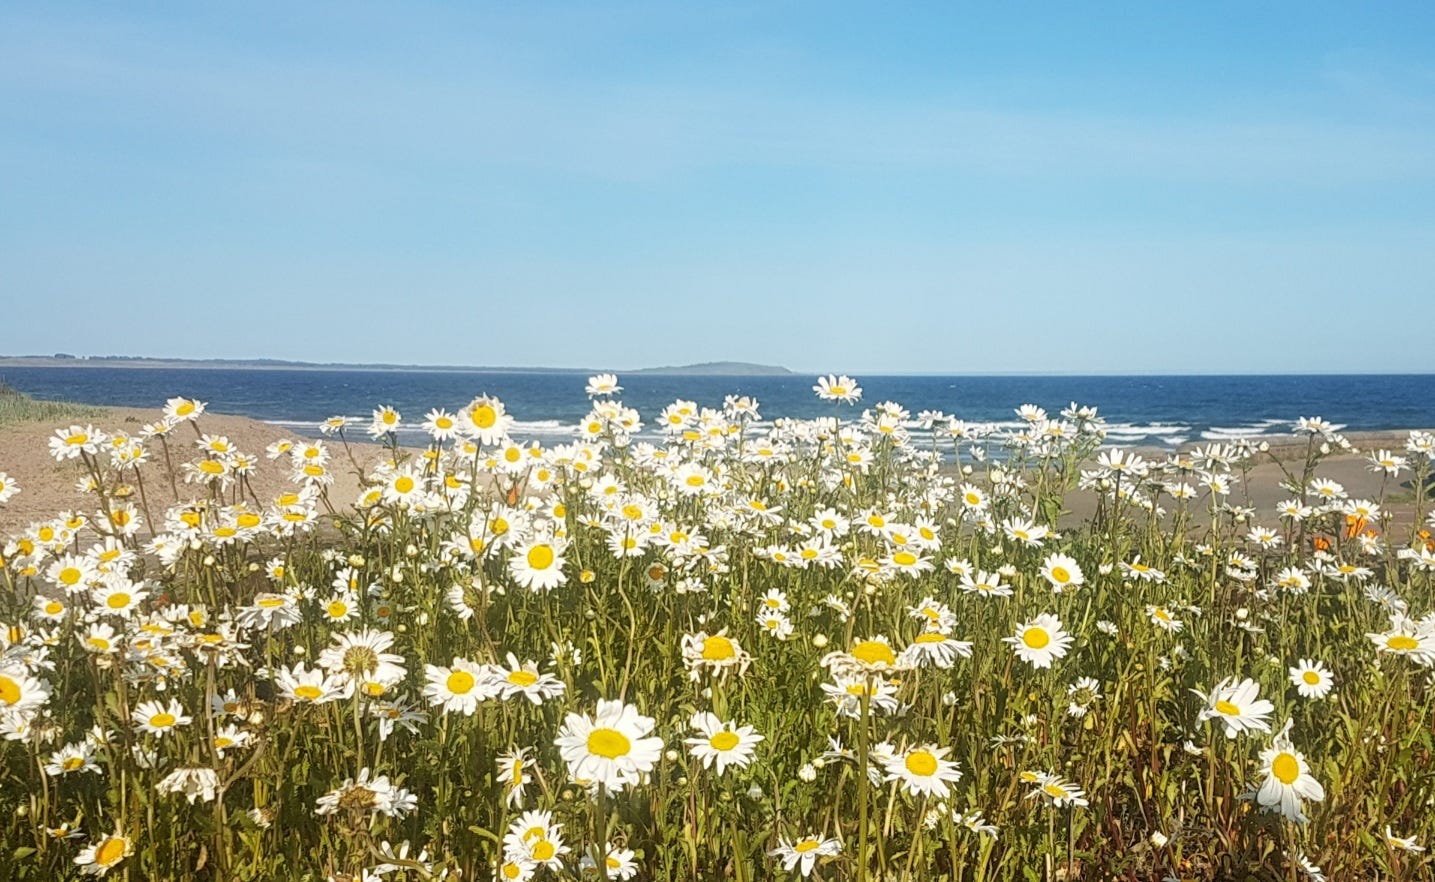 A mass of daisies beside the beach overlooking the sea in Scotland on a sunny day.